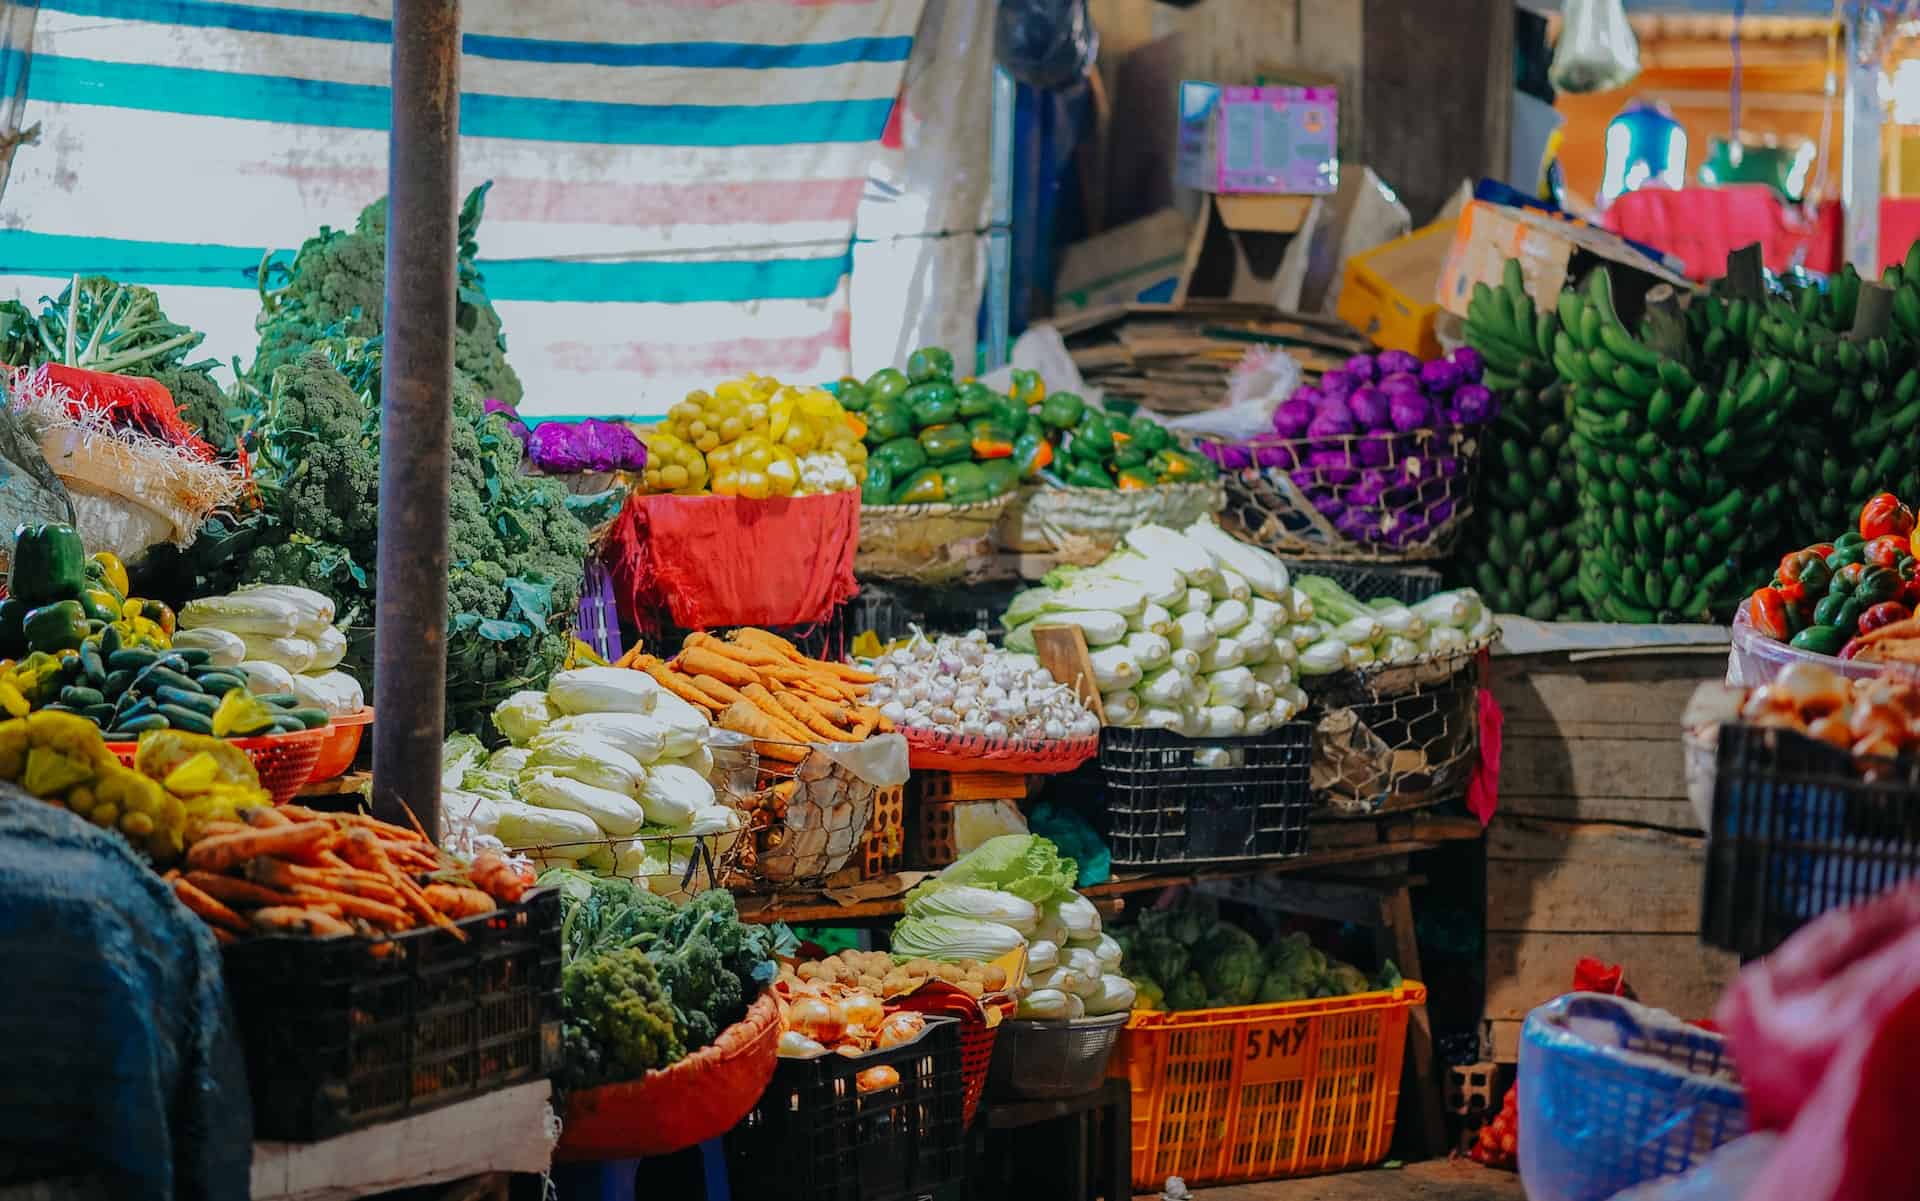 a stall of vegetables in baskets for sale